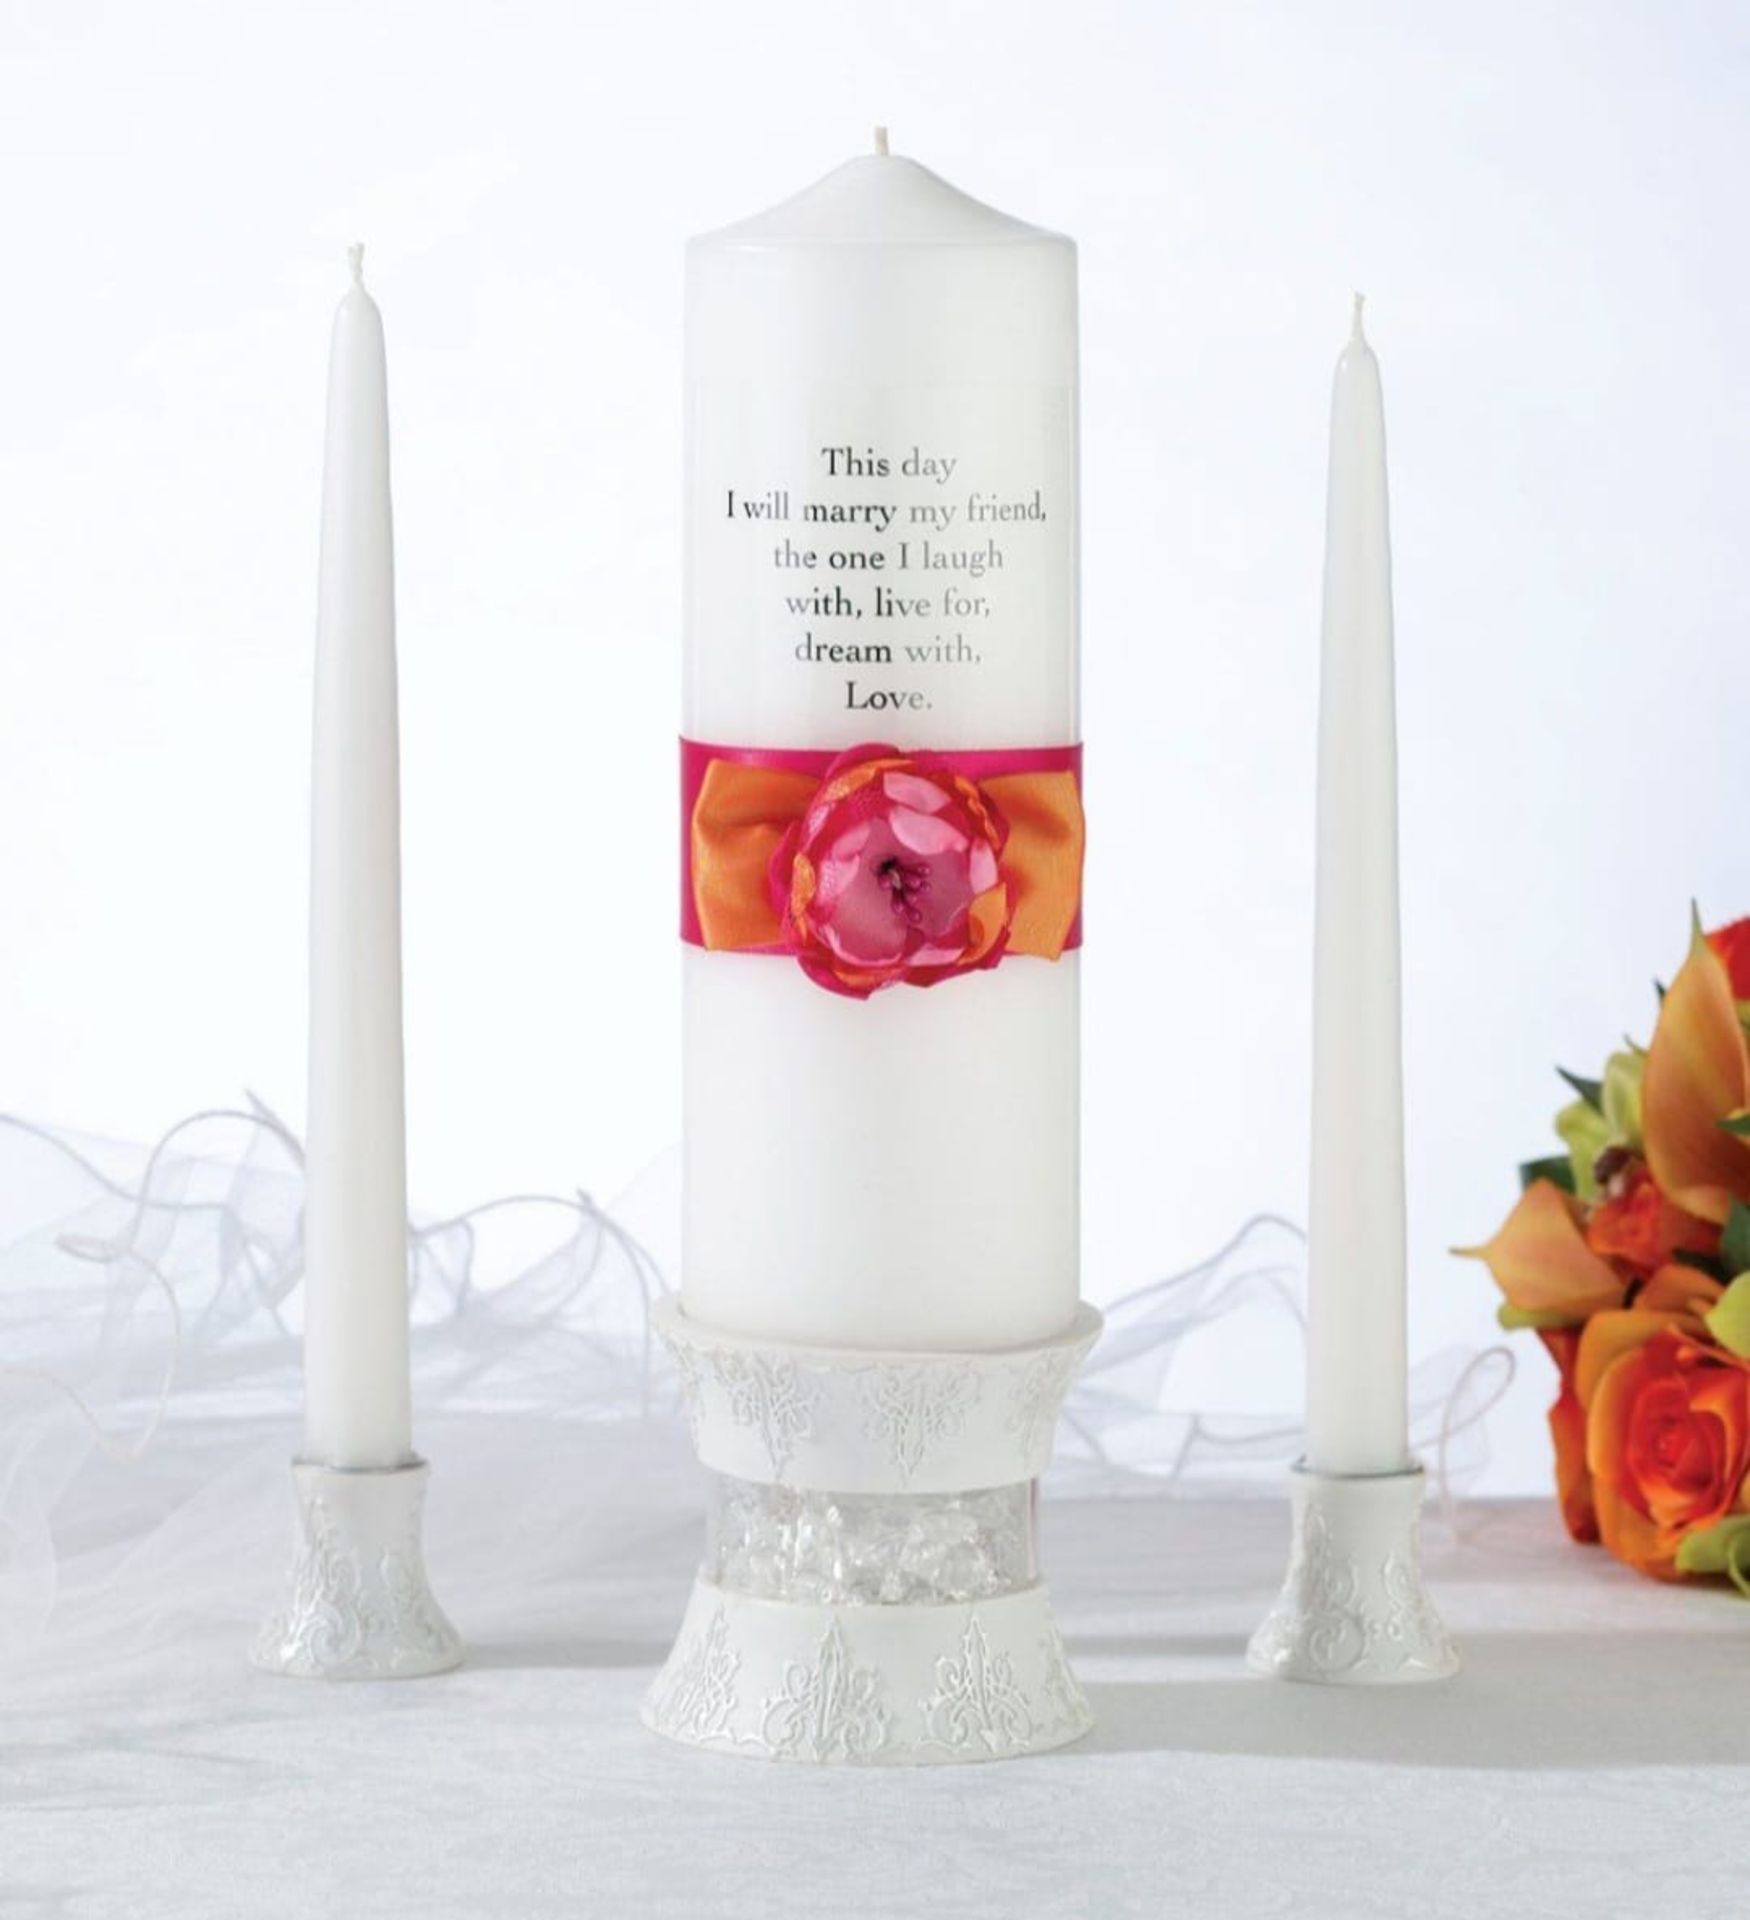 X 1 SET OF WEDDING CEREMONY UNITY CANDLES WITH A MESSAGES - BY LILLIAN ROSE - NEW.